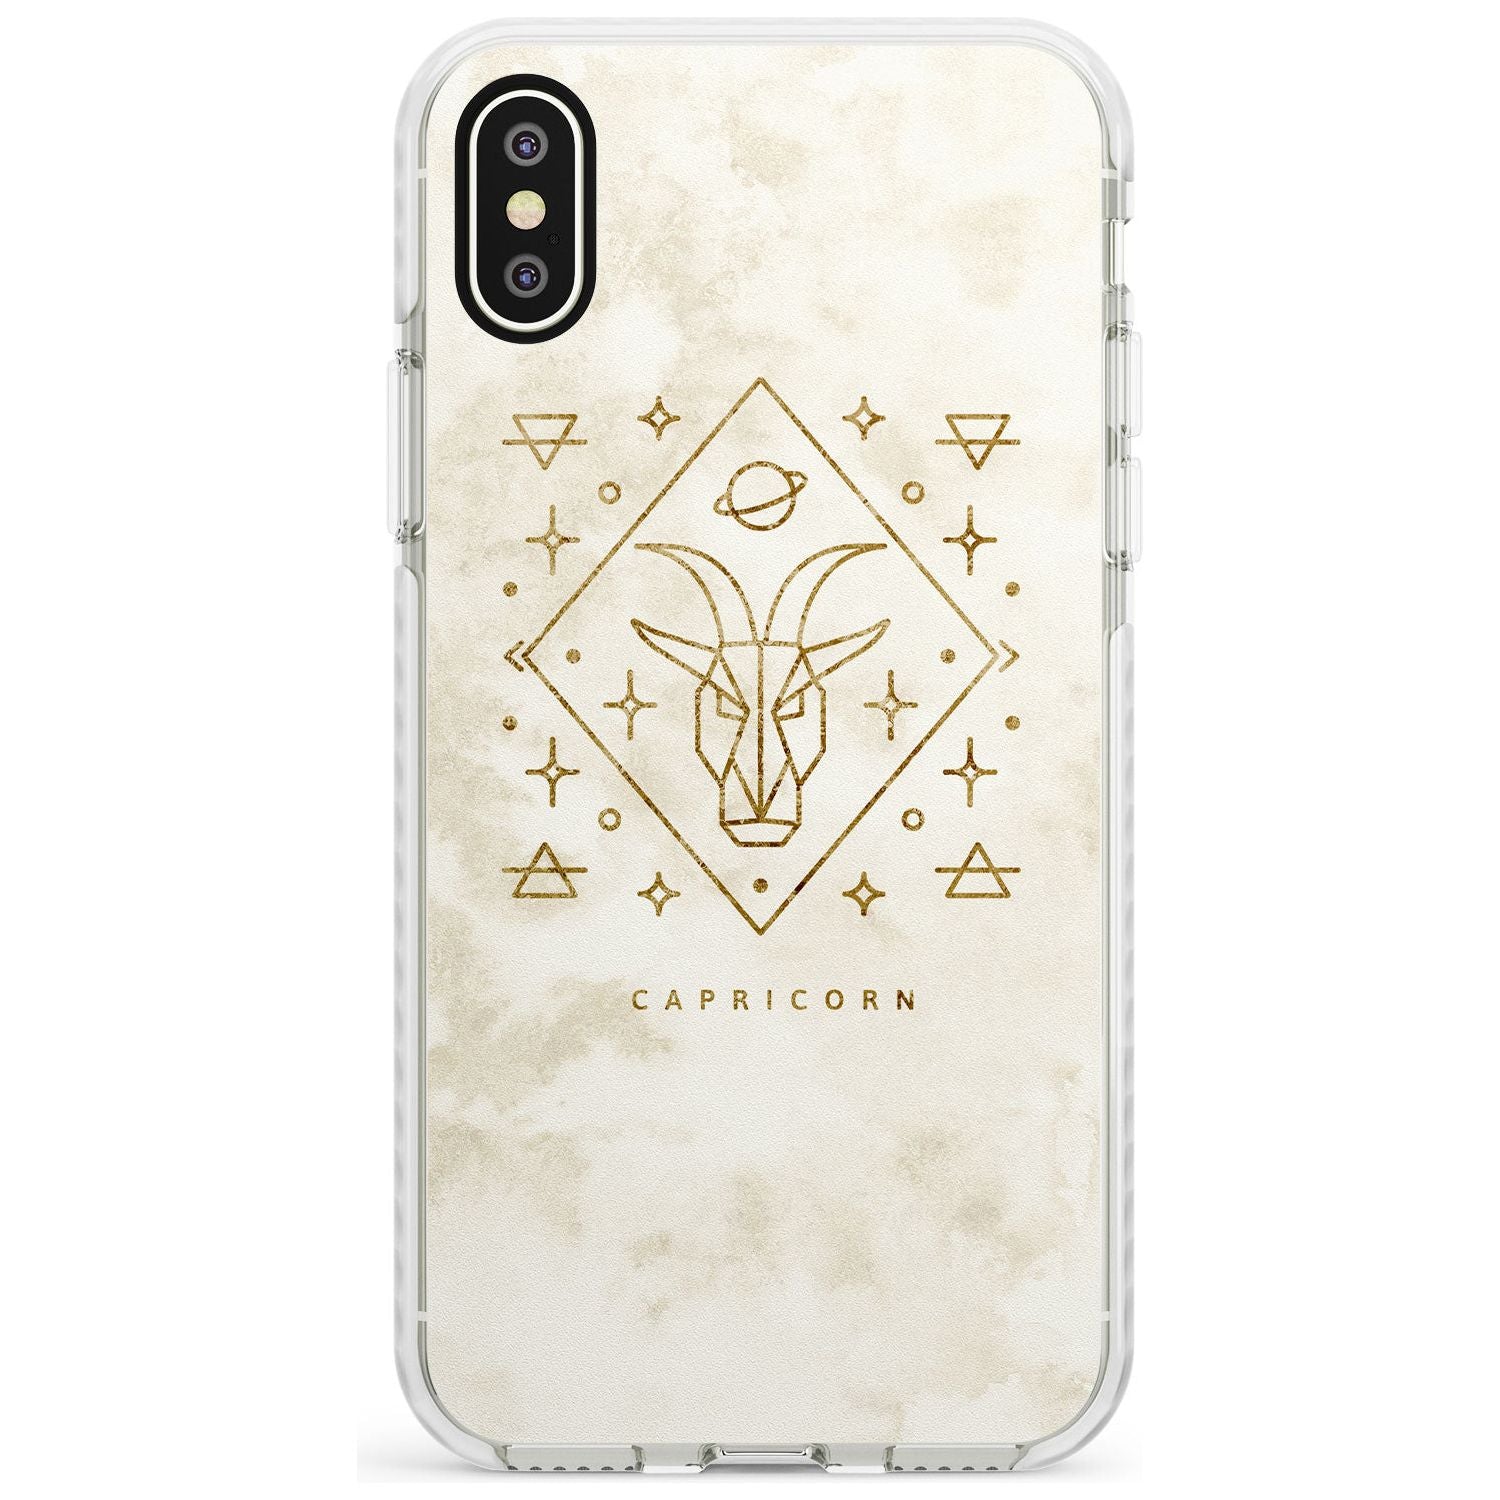 Capricorn Emblem - Solid Gold Marbled Design Impact Phone Case for iPhone X XS Max XR